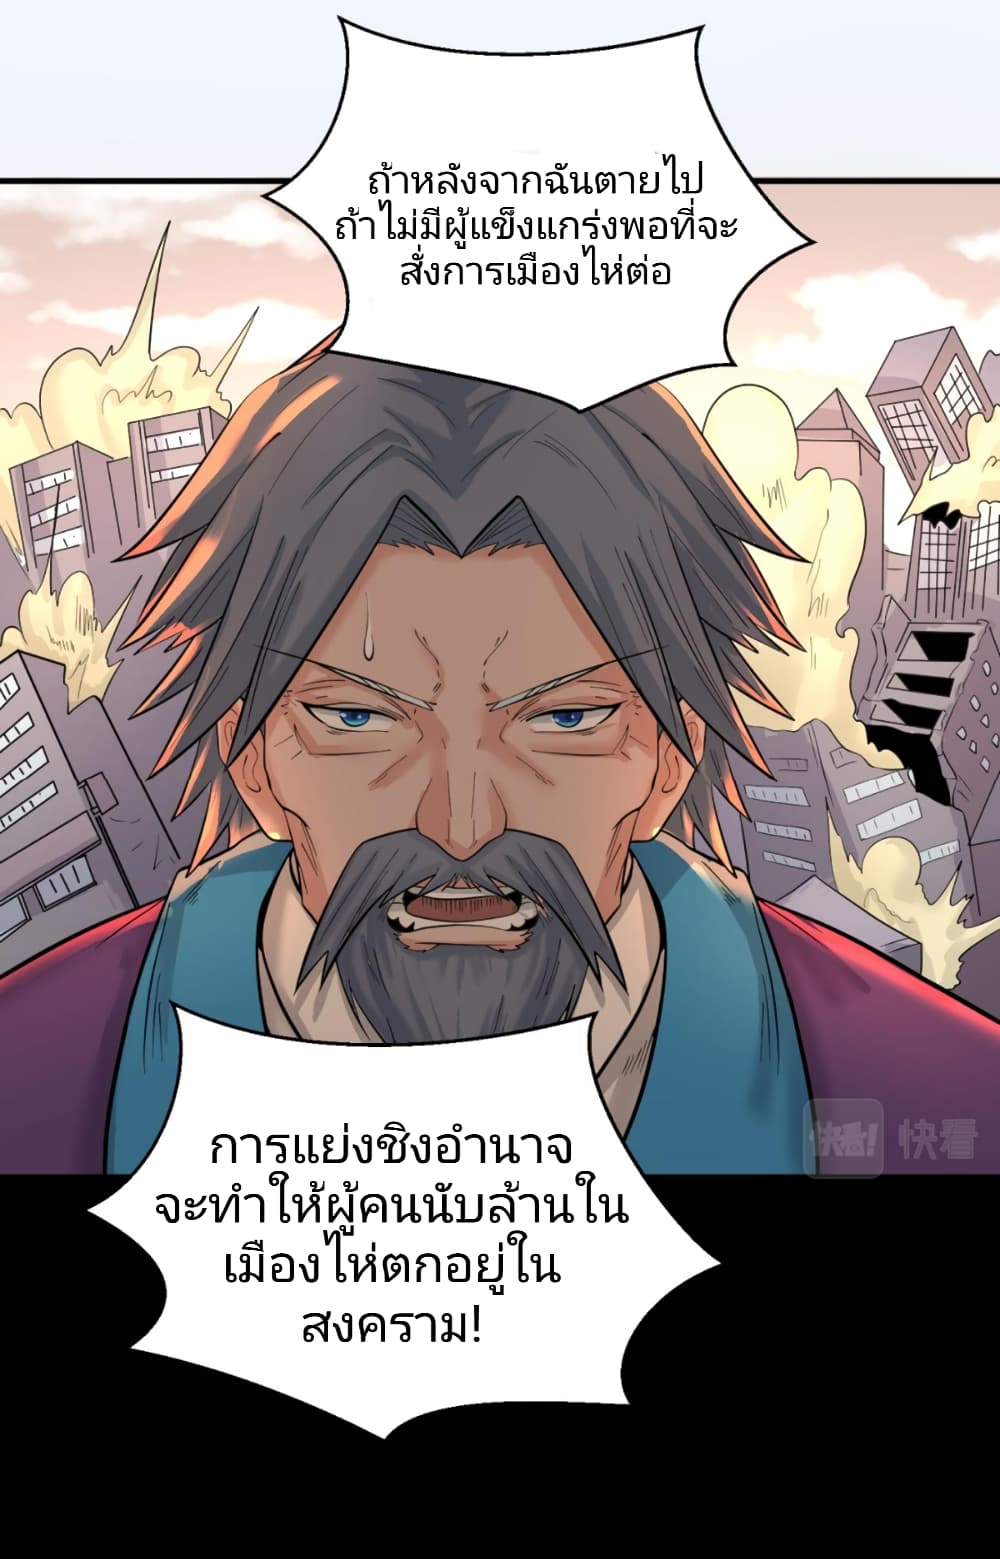 The Age of Ghost Spirits à¸à¸­à¸à¸à¸µà¹ 40 (23)